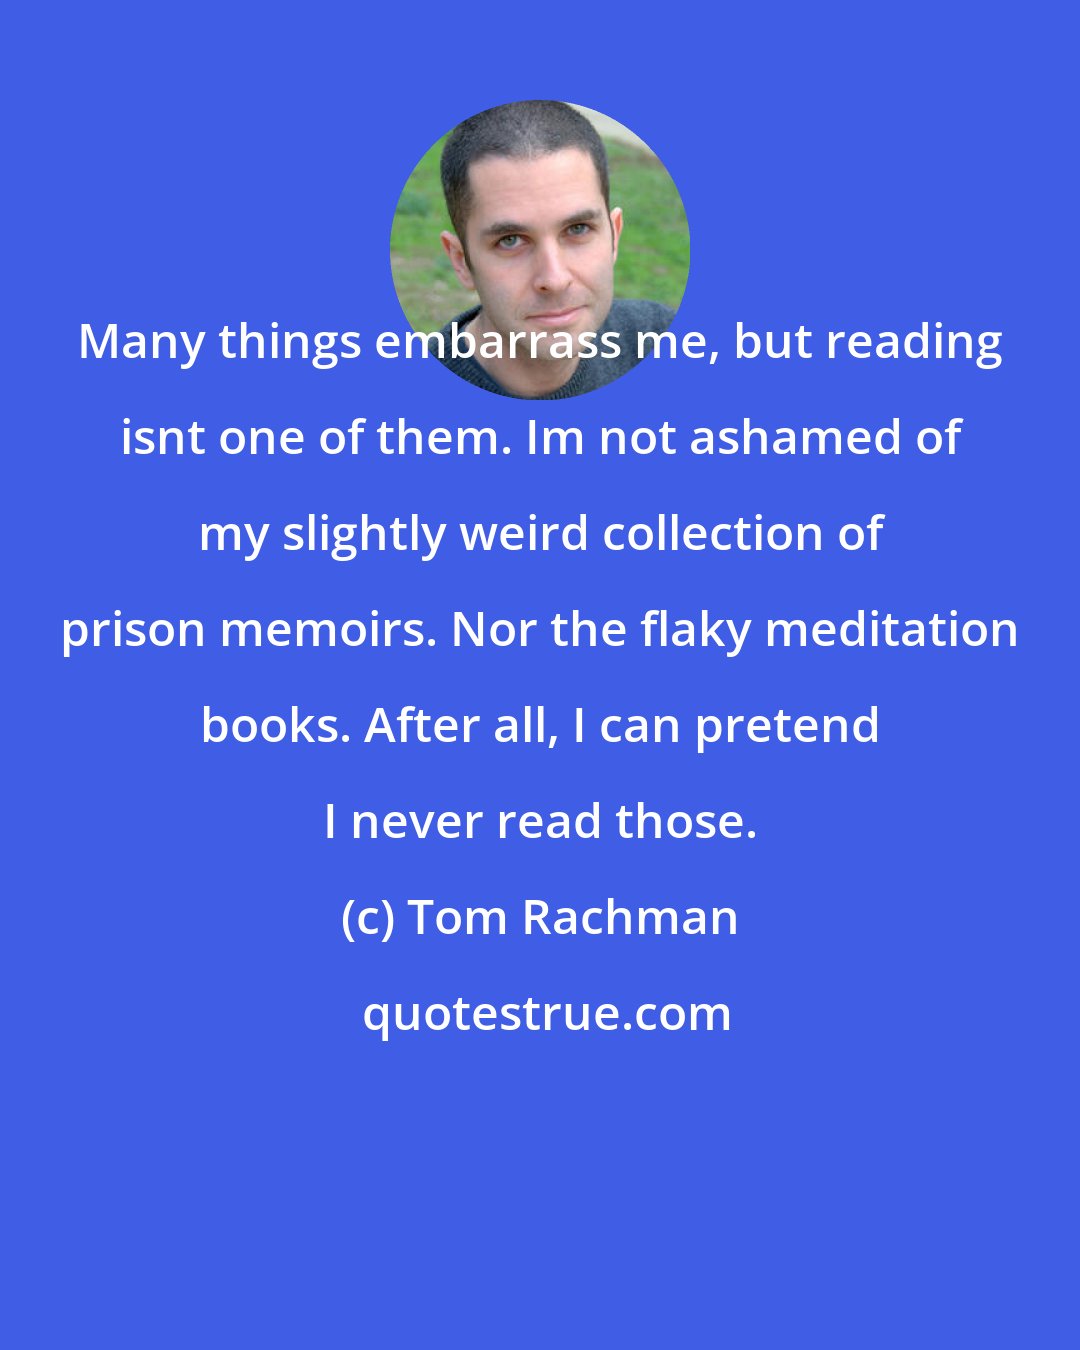 Tom Rachman: Many things embarrass me, but reading isnt one of them. Im not ashamed of my slightly weird collection of prison memoirs. Nor the flaky meditation books. After all, I can pretend I never read those.